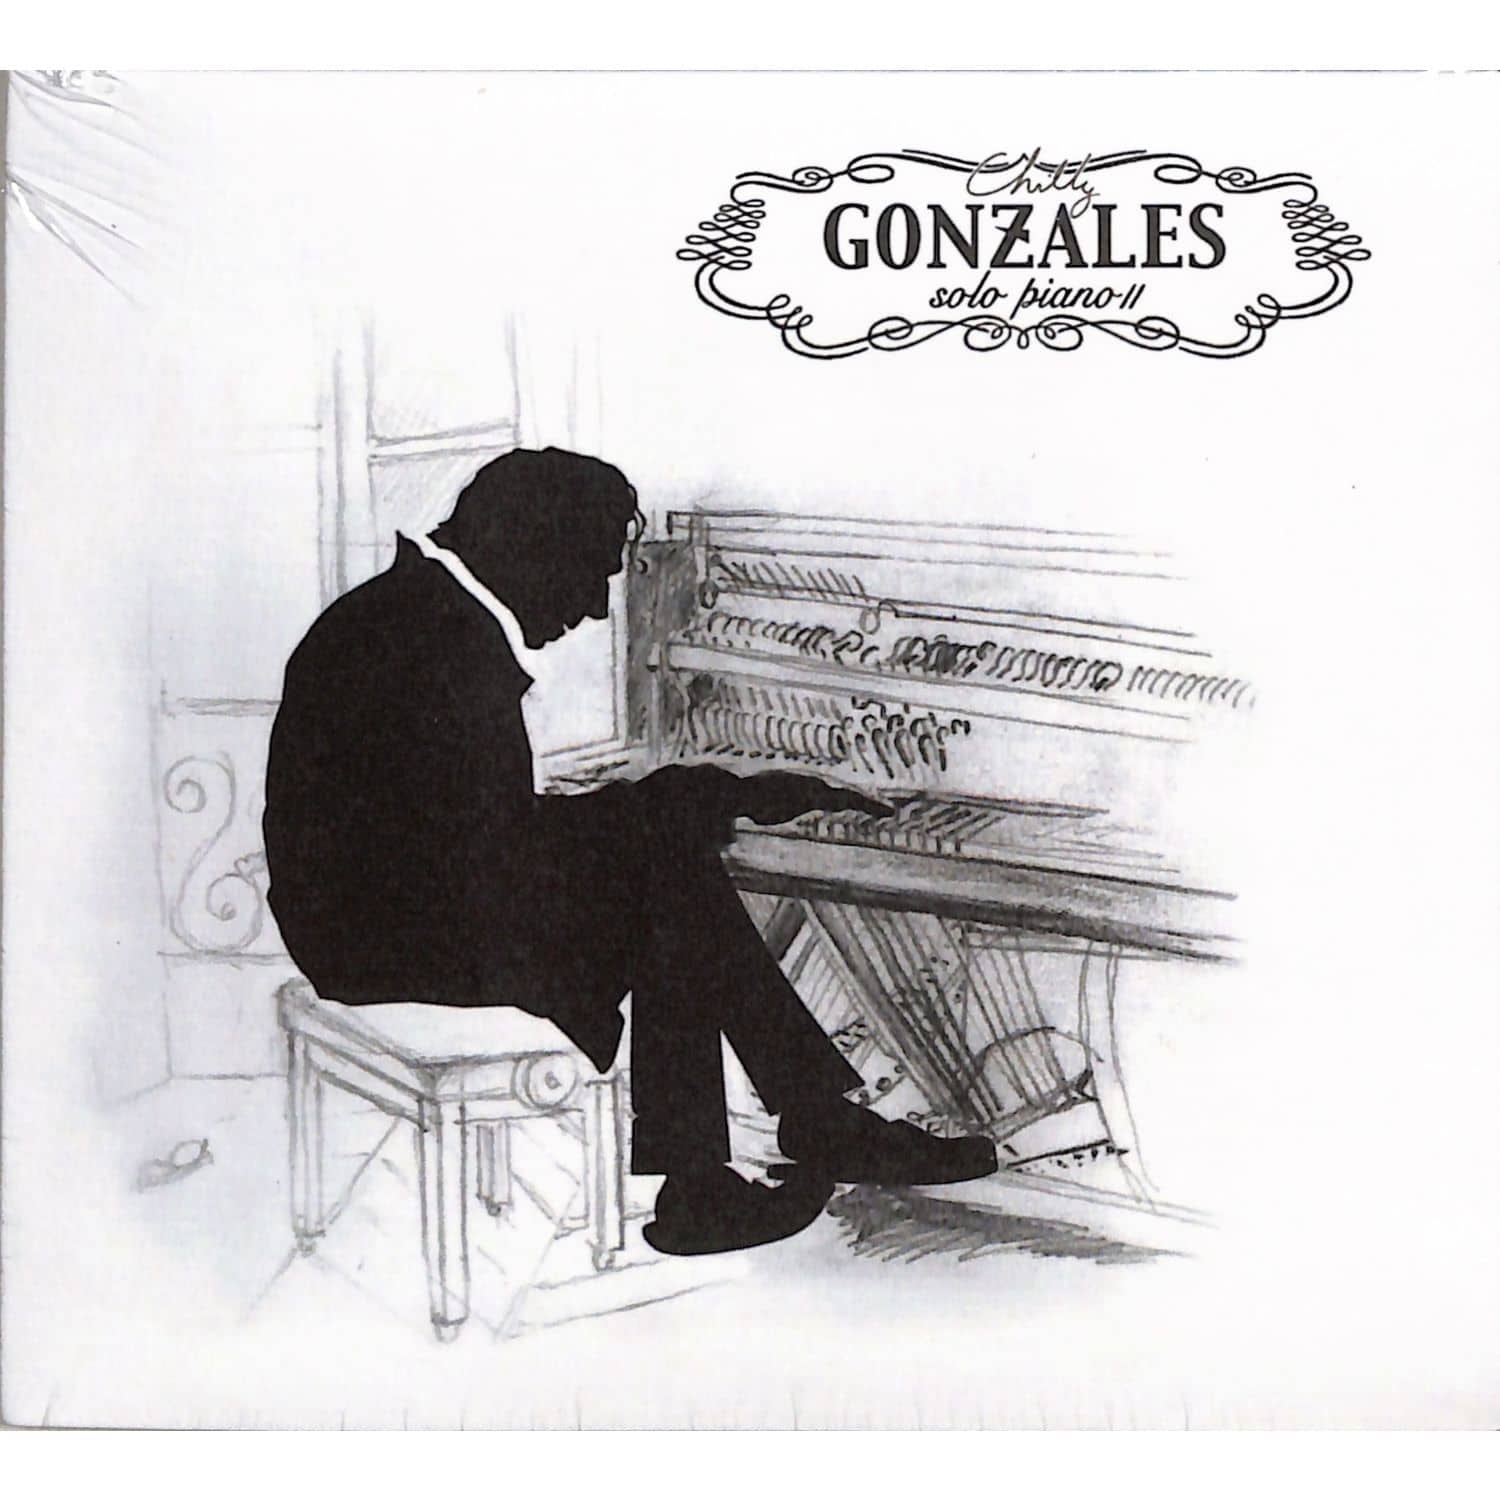 Chilly Gonzales - SOLO PIANO II 